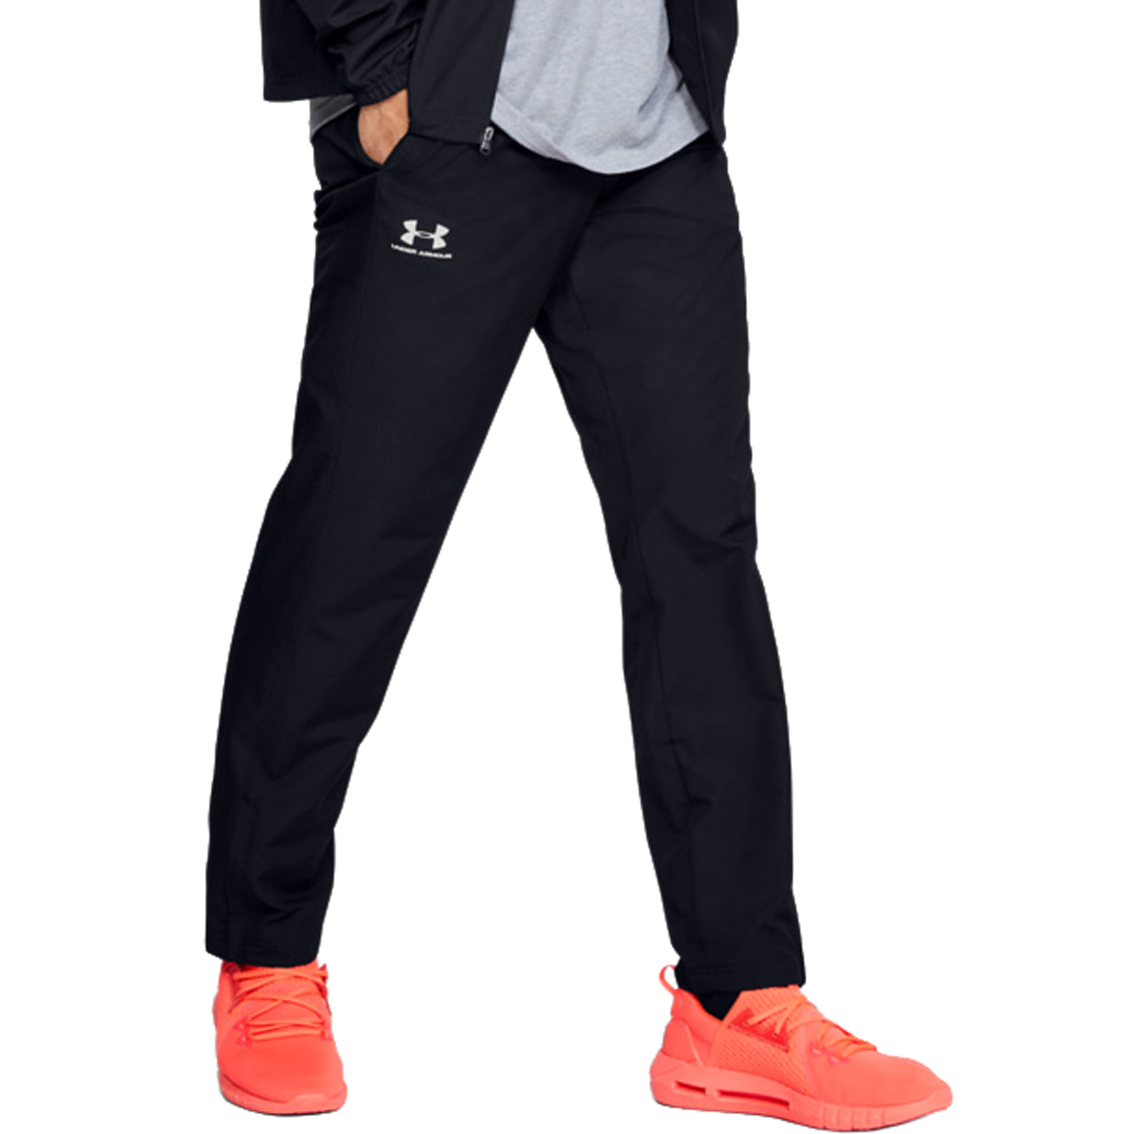 Under Armour Vital Woven Pants - Image 1 of 6